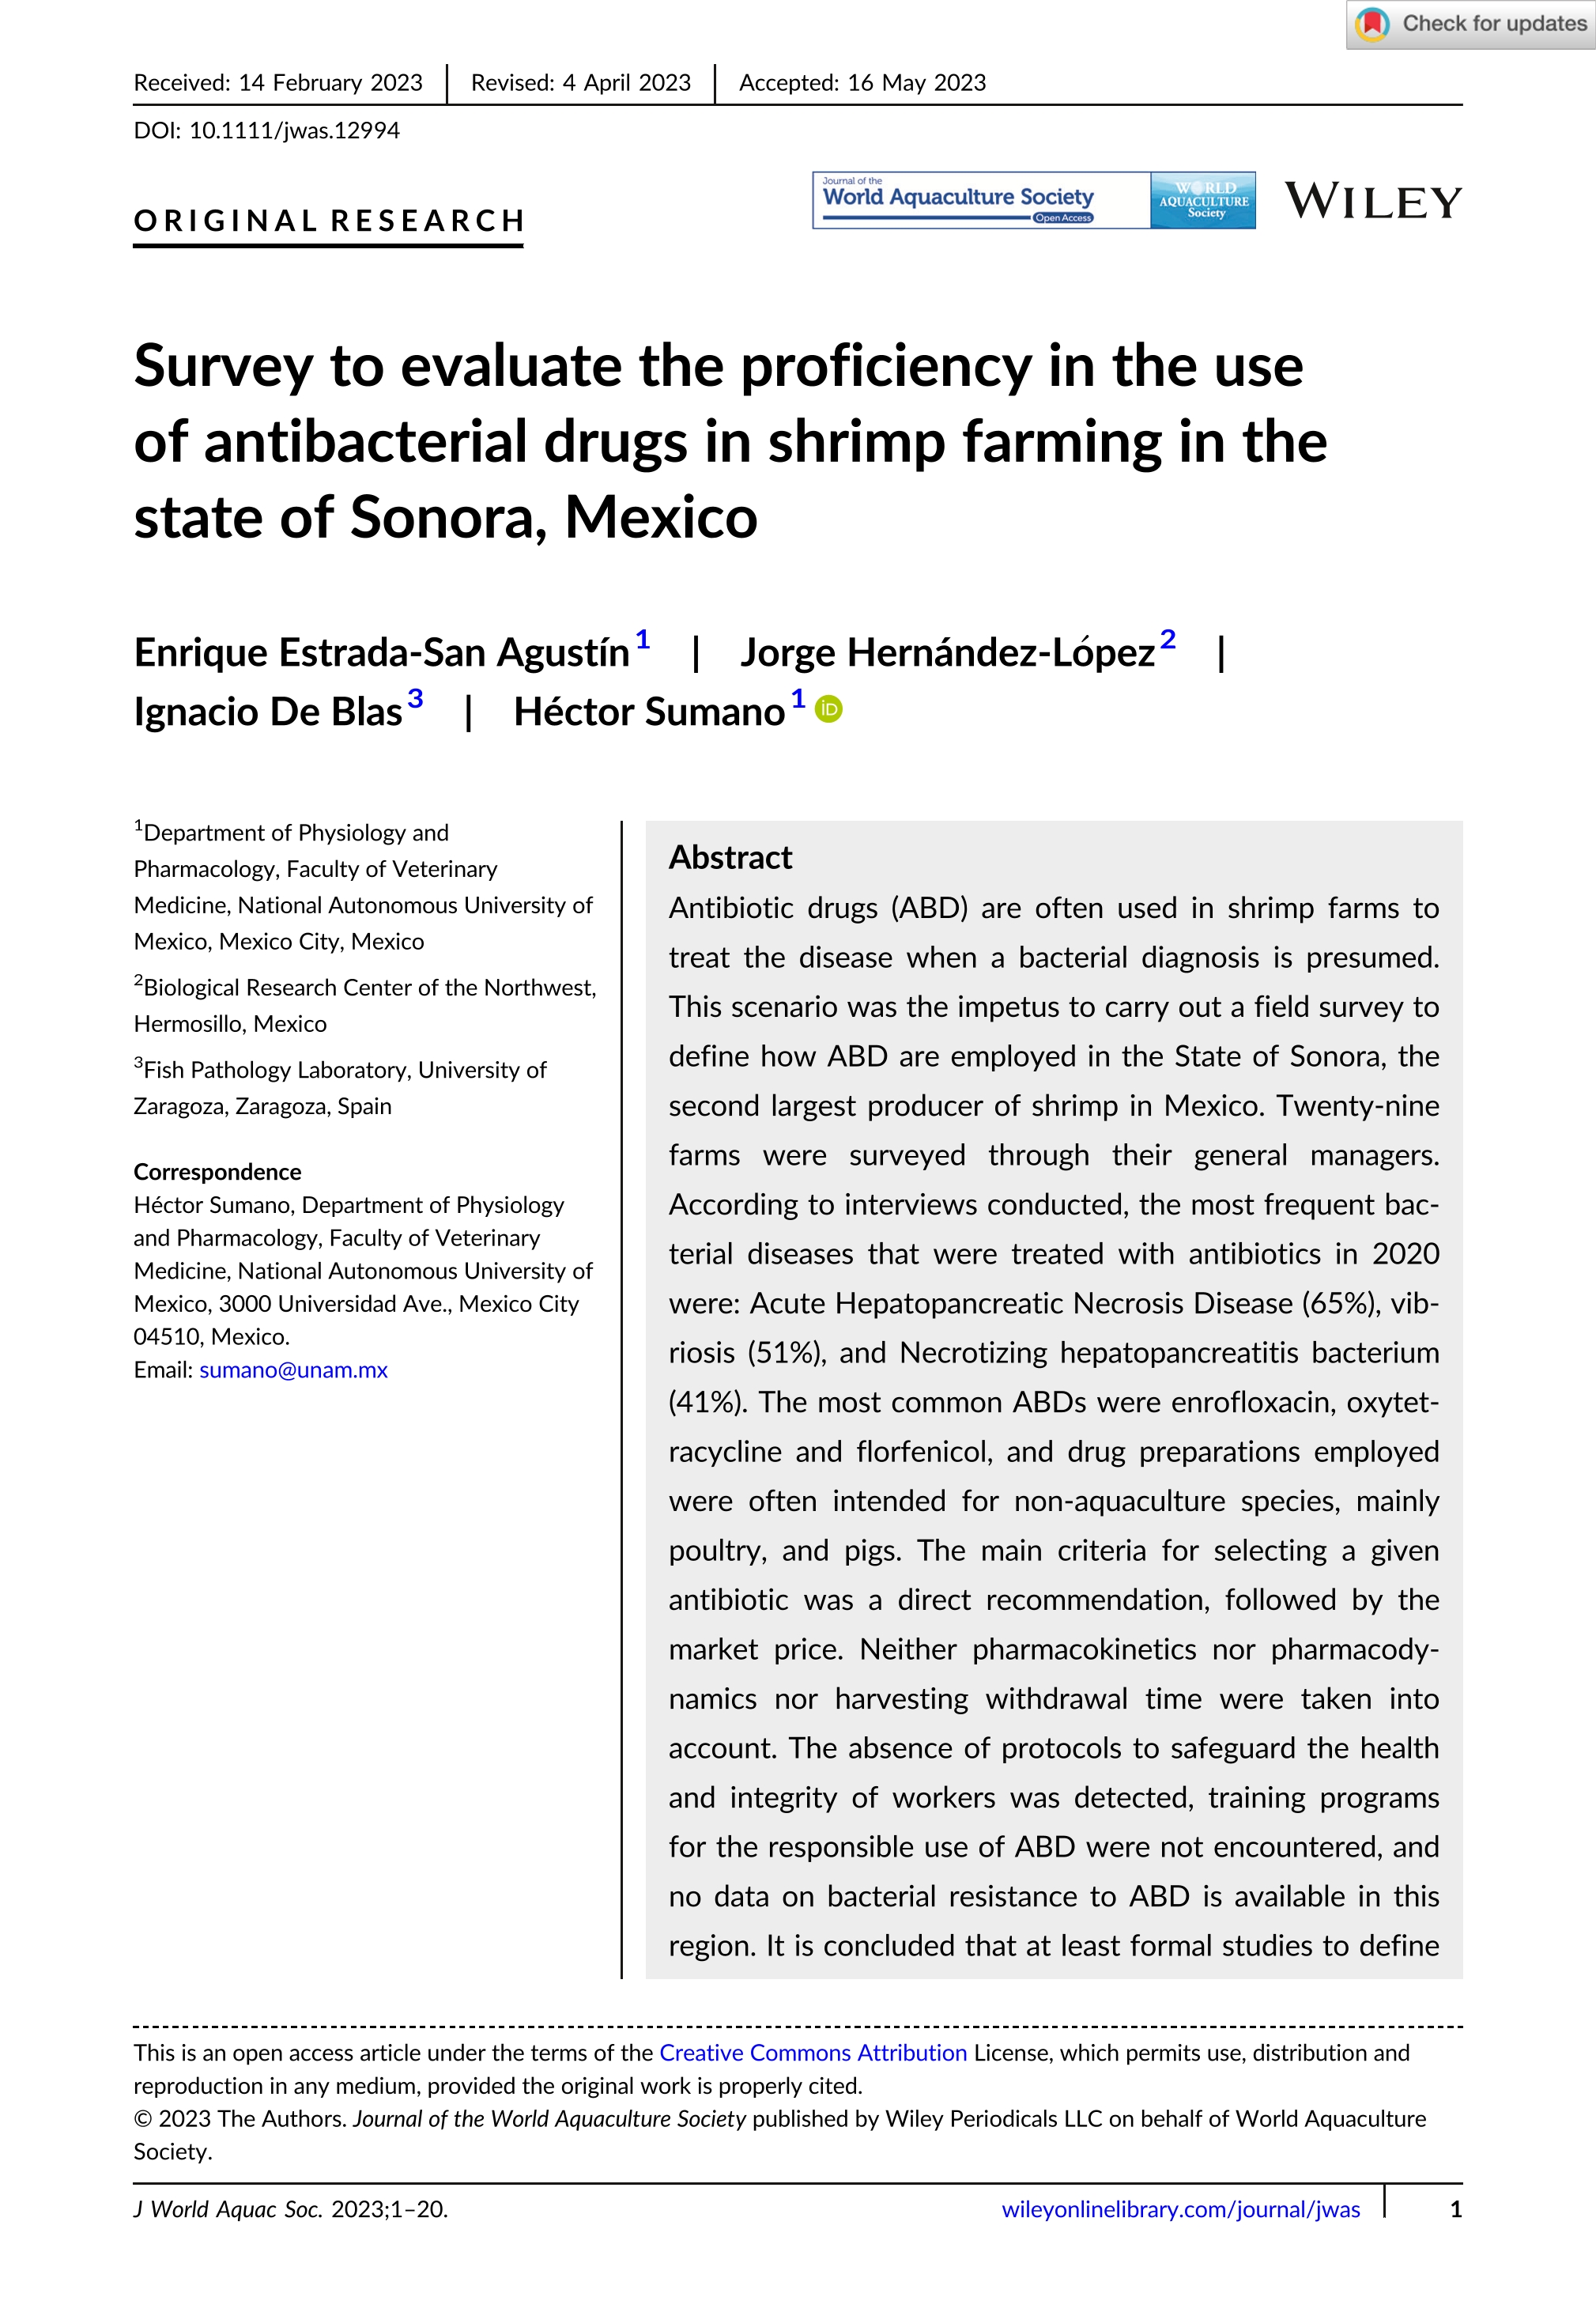 Survey to evaluate the proficiency in the use of antibacterial drugs in shrimp farming in the state of Sonora, Mexico